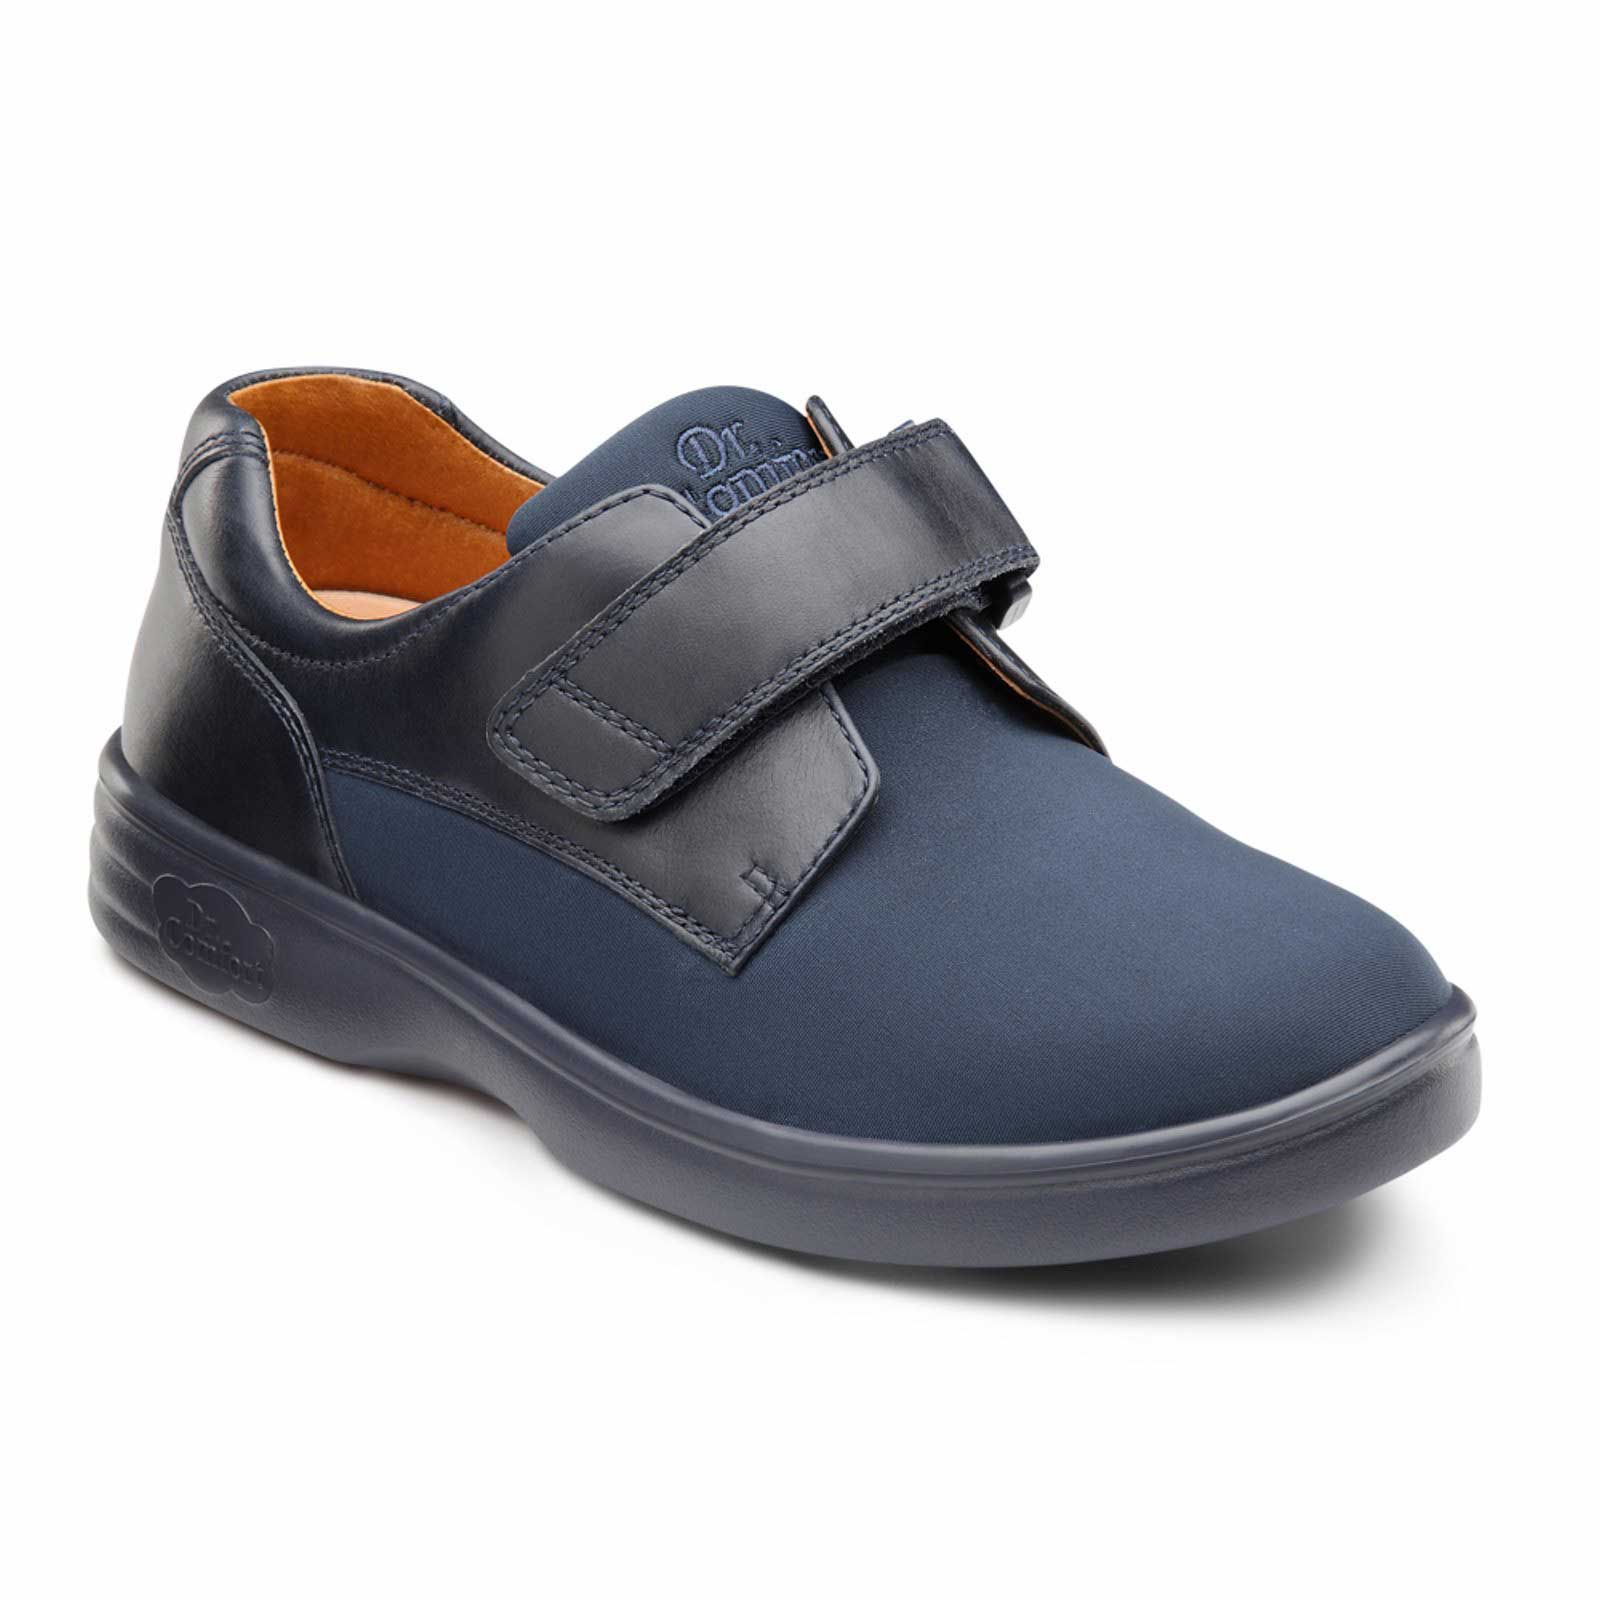 The Annie Shoe from Dr. Comfort